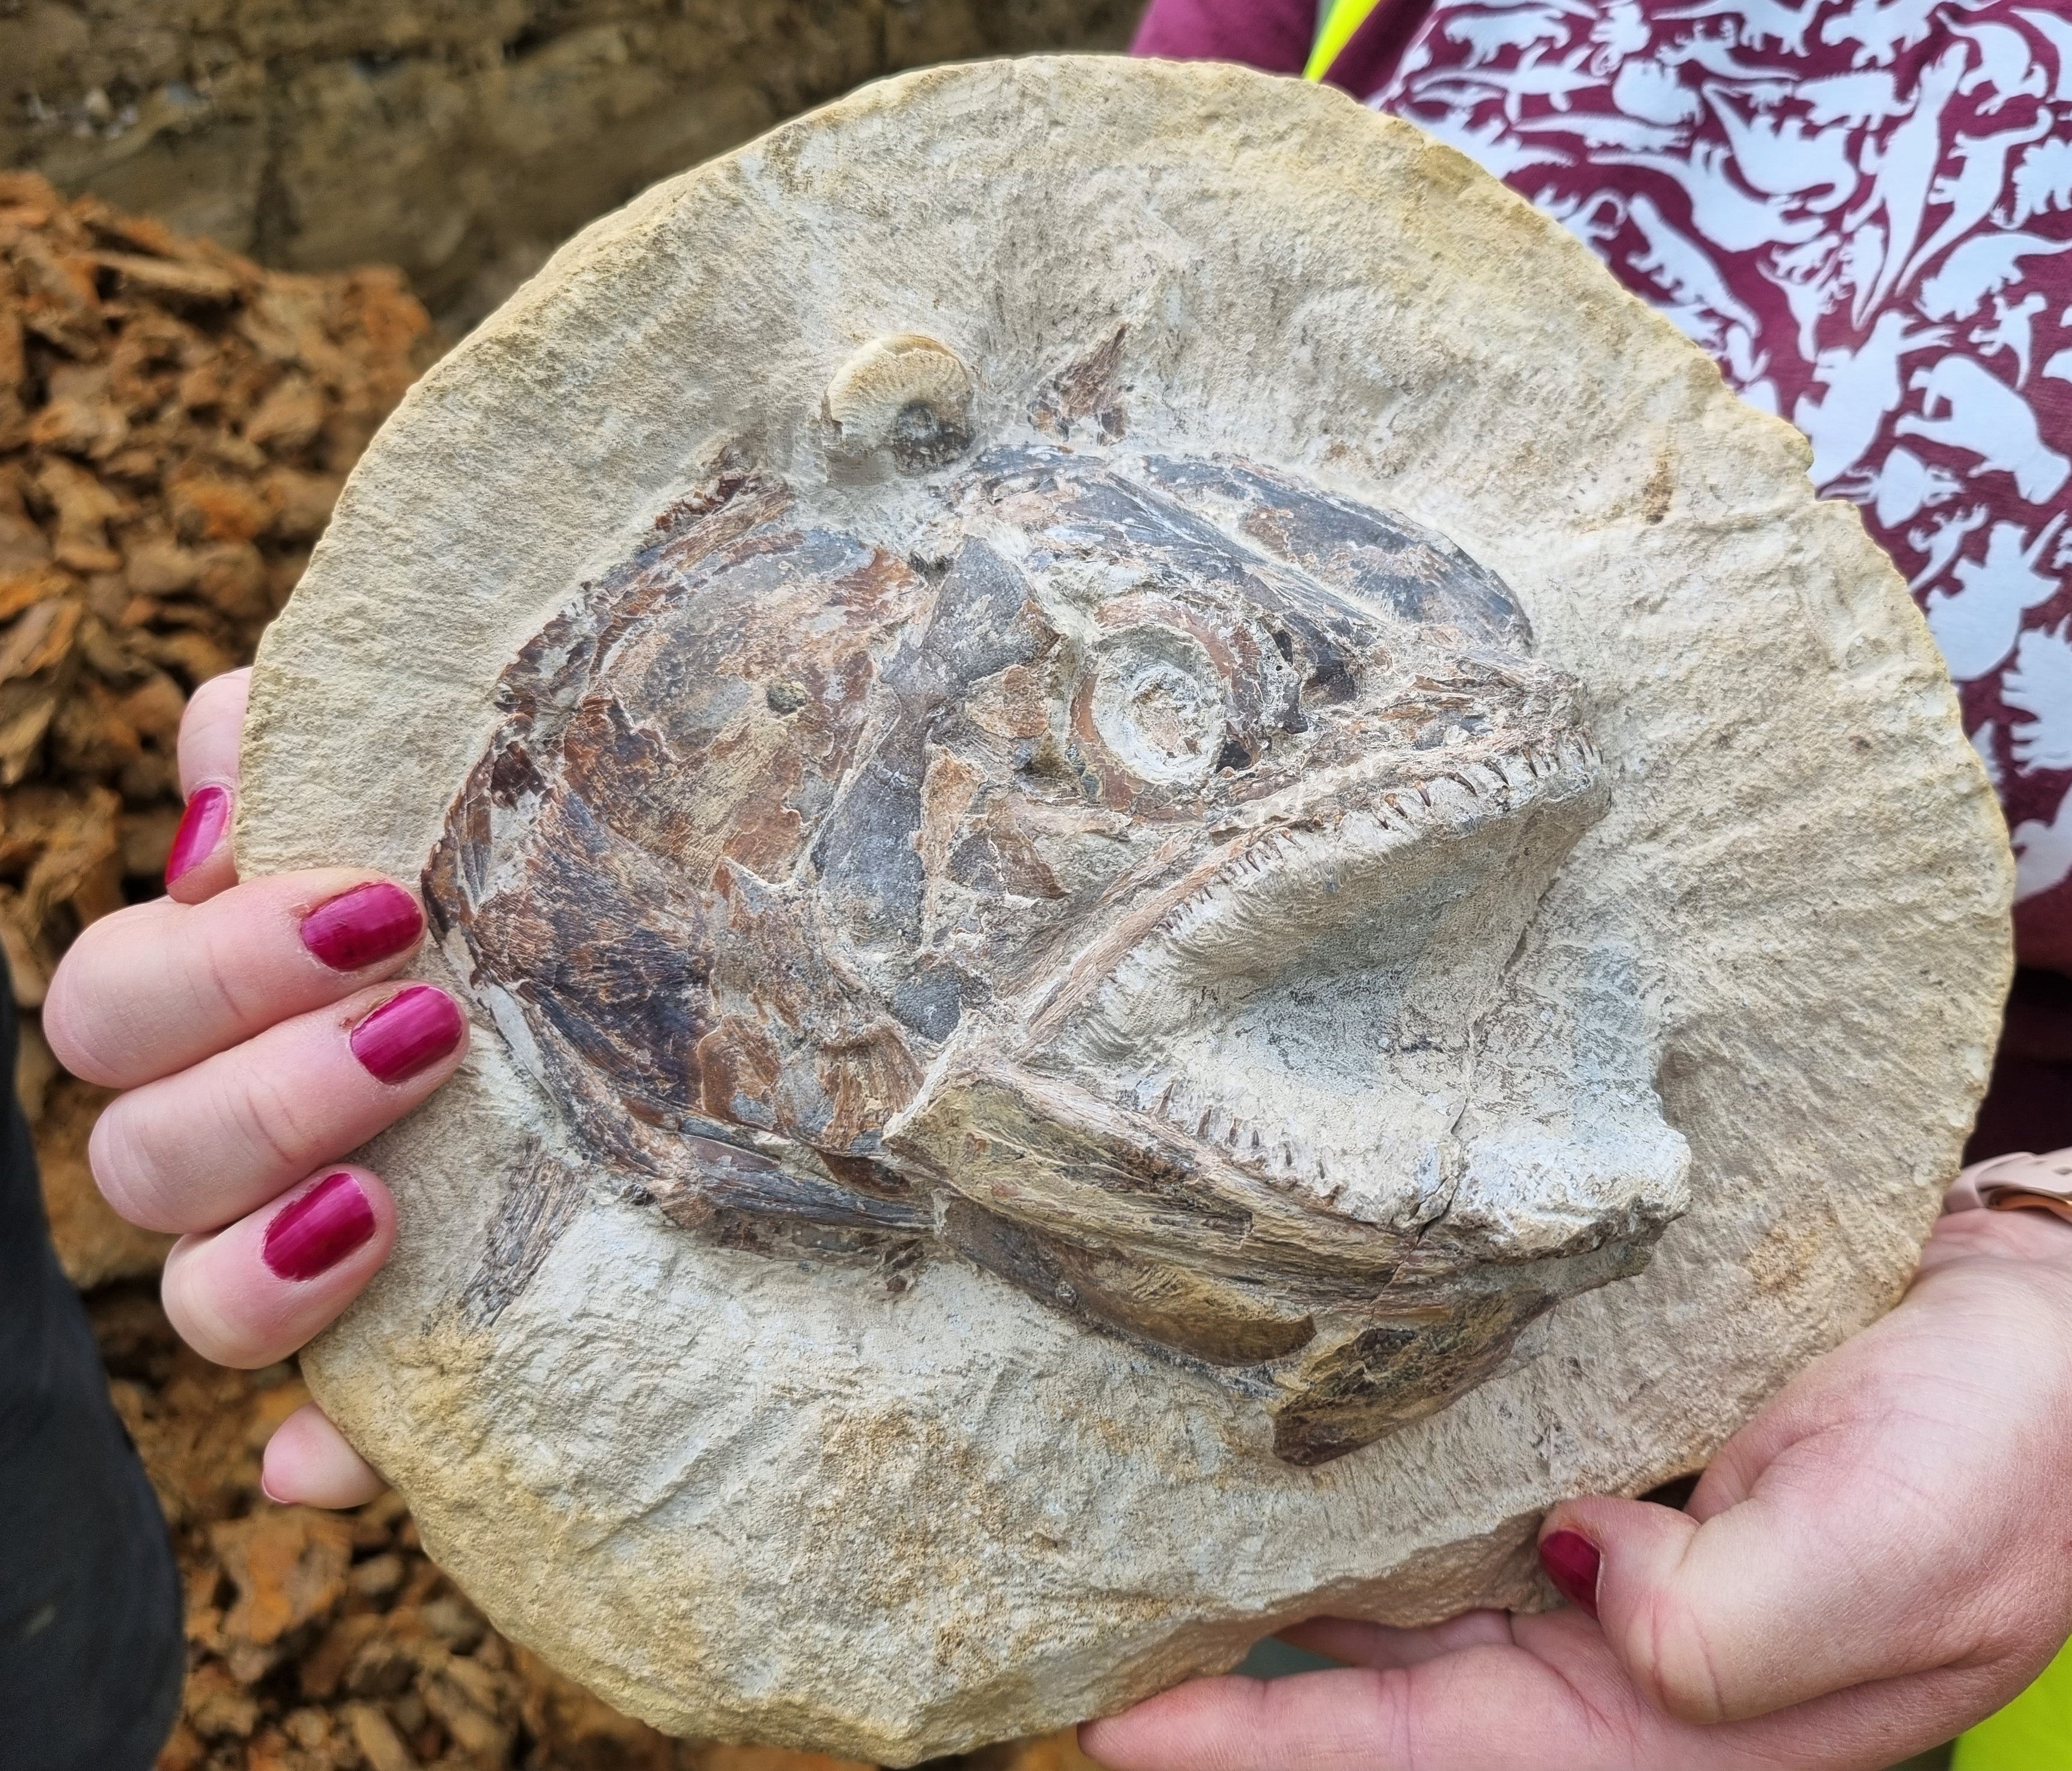 Eye-popping fossil fish found in cattle field | The Independent